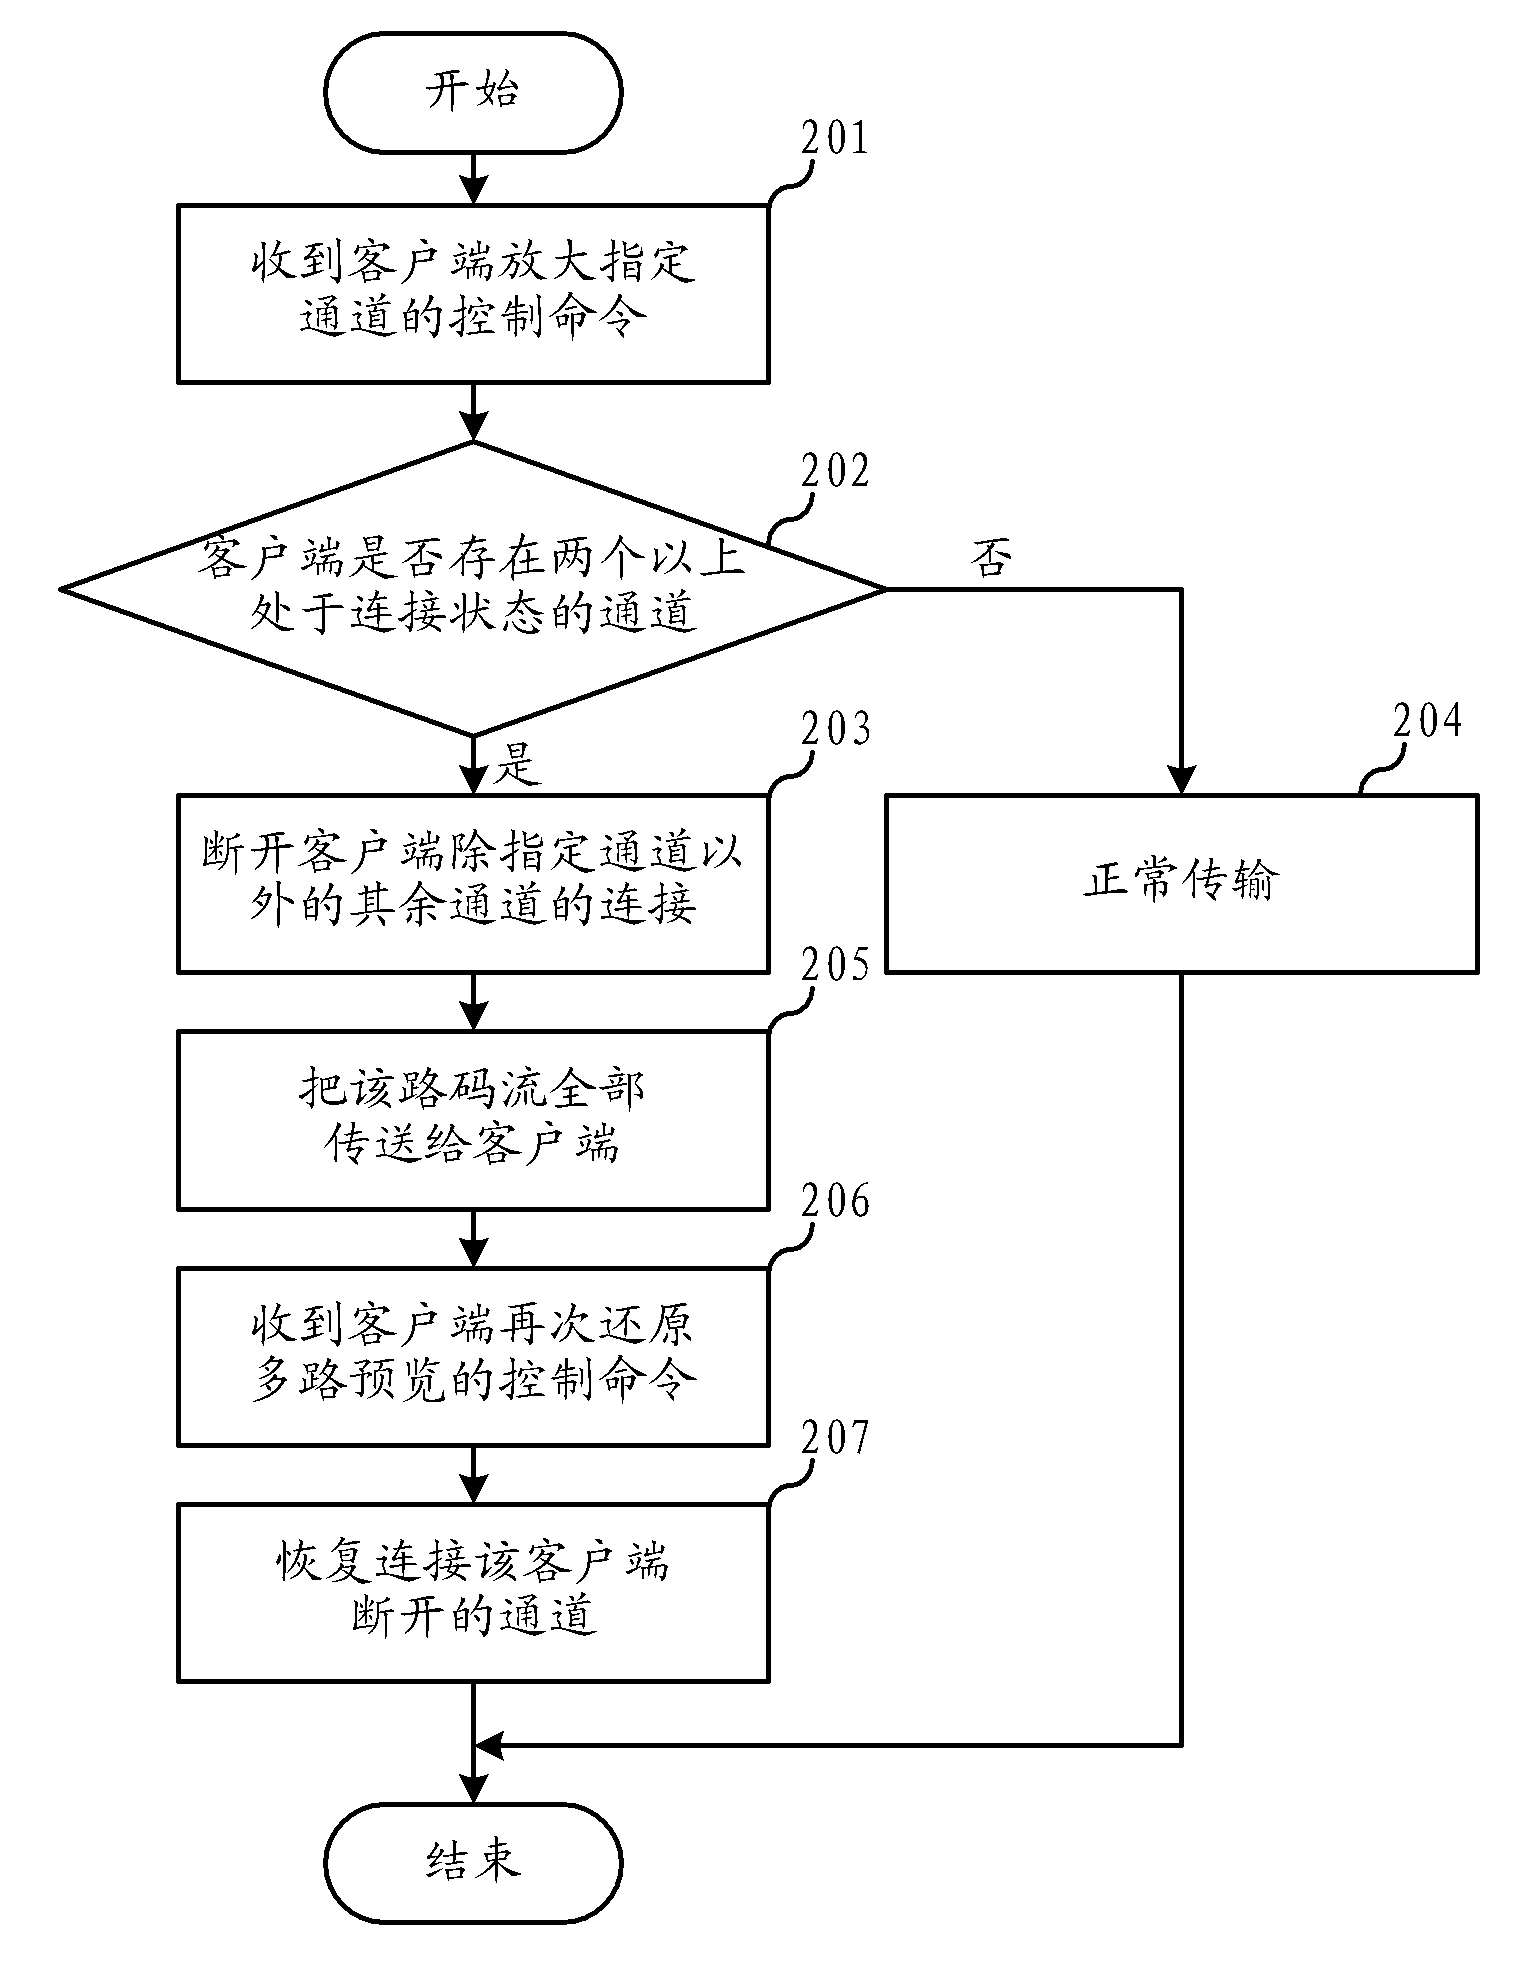 Video monitoring method and device for digital video recorder under low-bandwidth condition